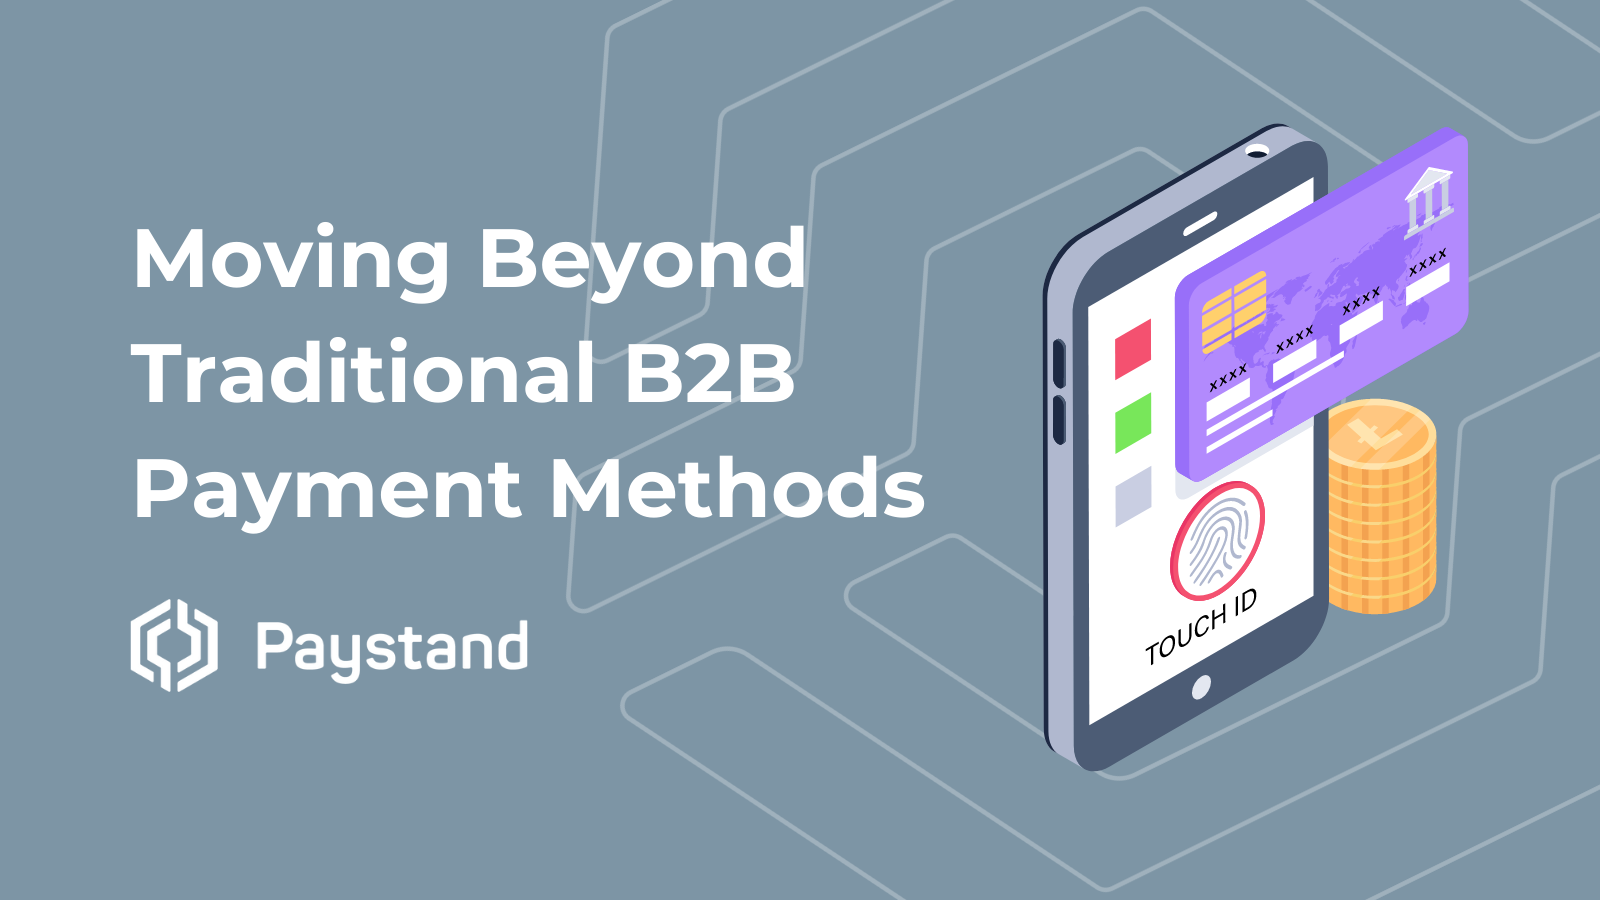 Moving Beyond Traditional B2B Payment Methods